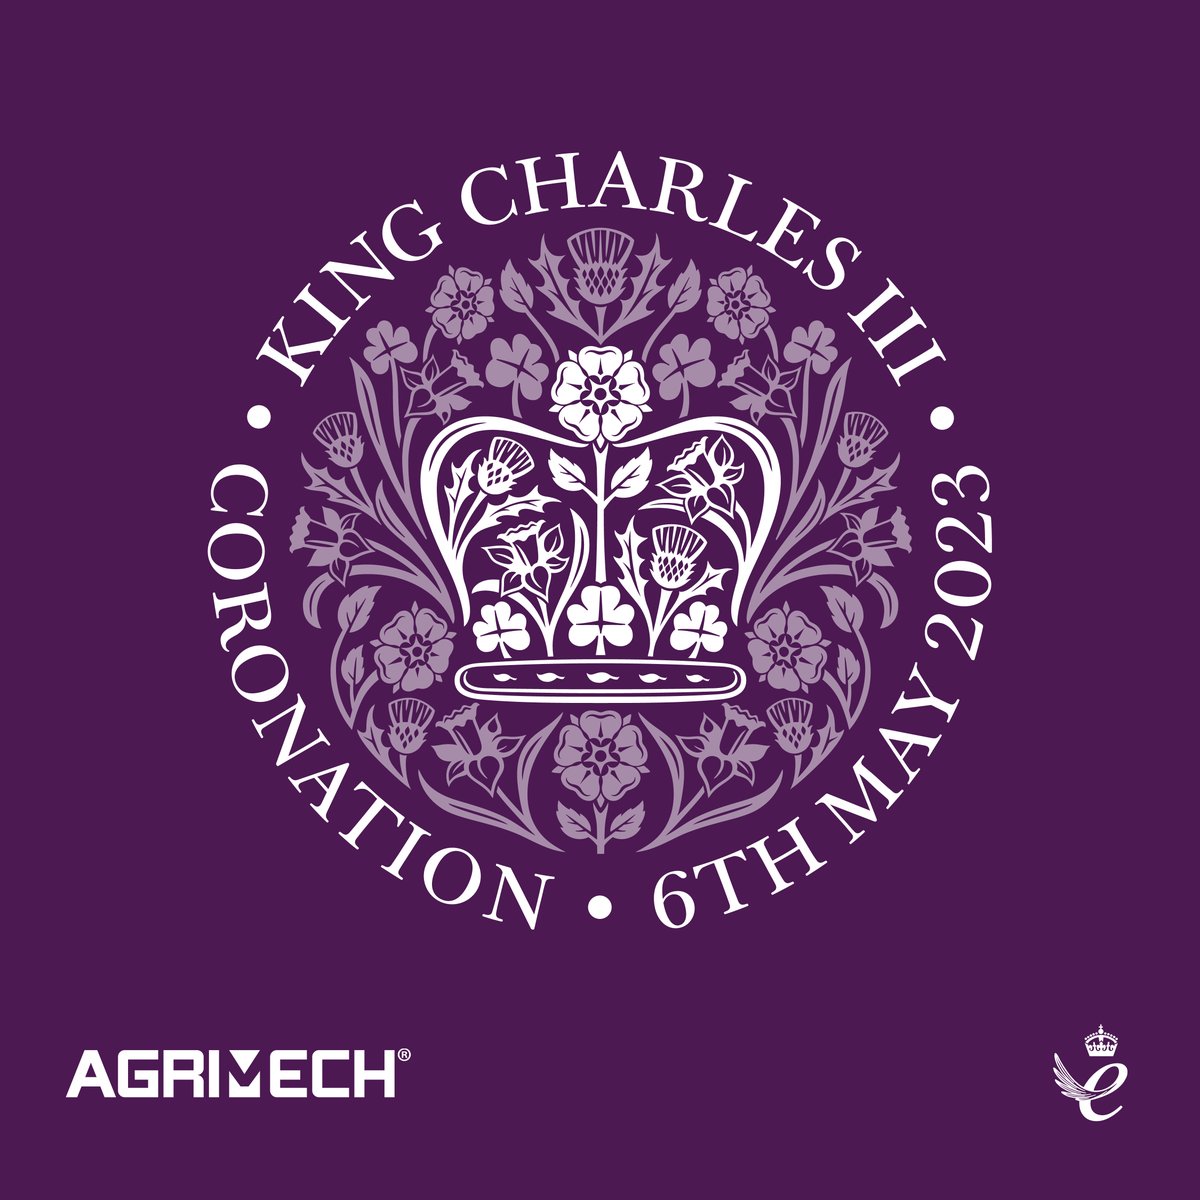 Today we celebrate the coronation of King Charles III. We wish you all a lovely Bank Holiday Weekend! 👑🎊

#coronation #coronationweekend #coronation2023 #queensaward #agrimech #agrimechuk #agricultureuk #agriuk